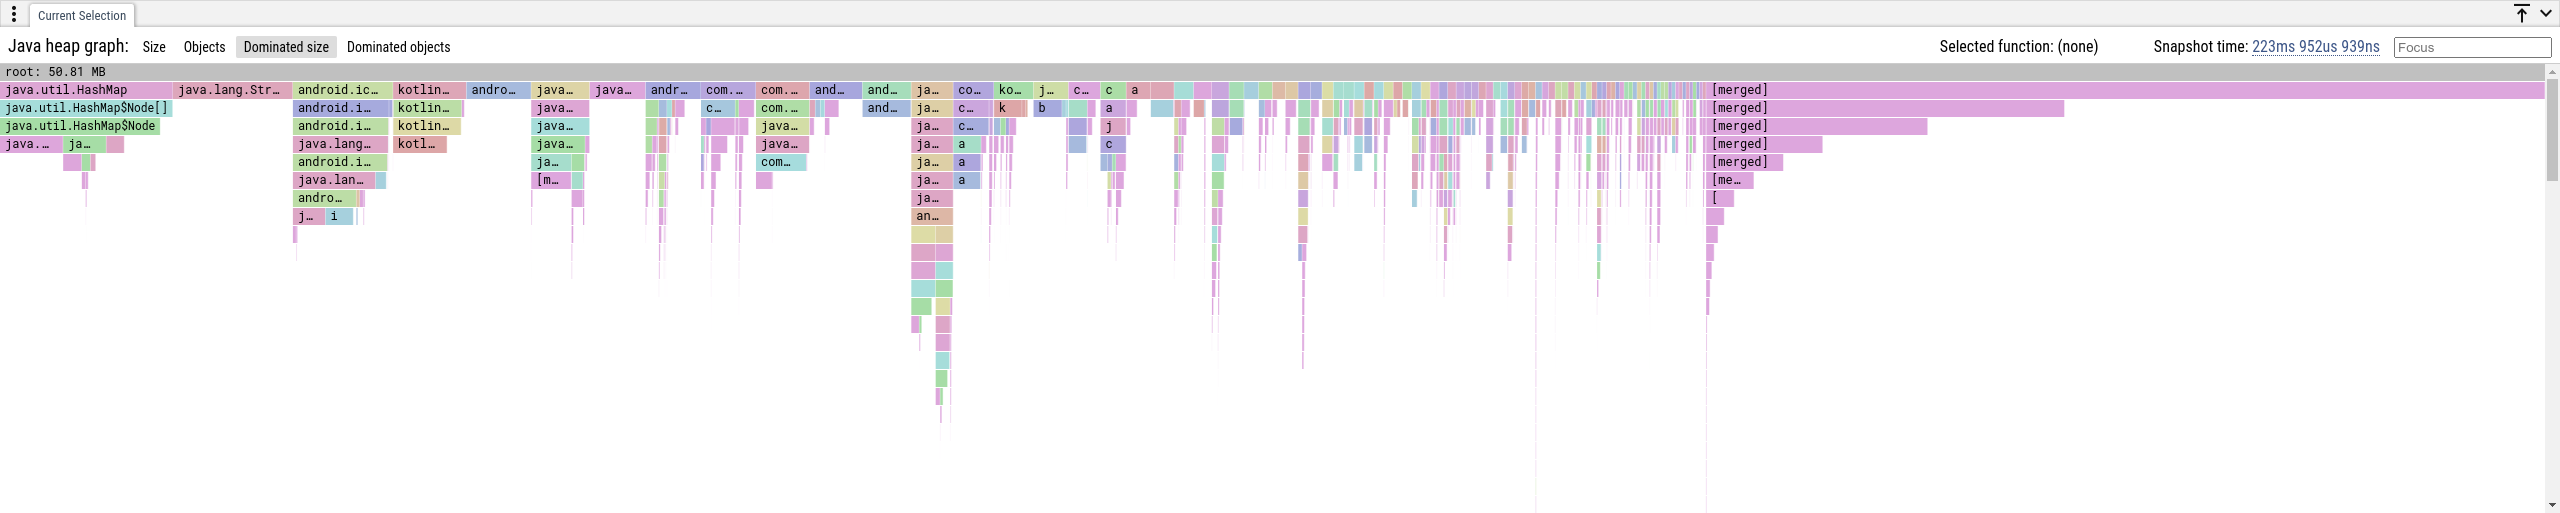 Java Flamegraph: Dominated Size